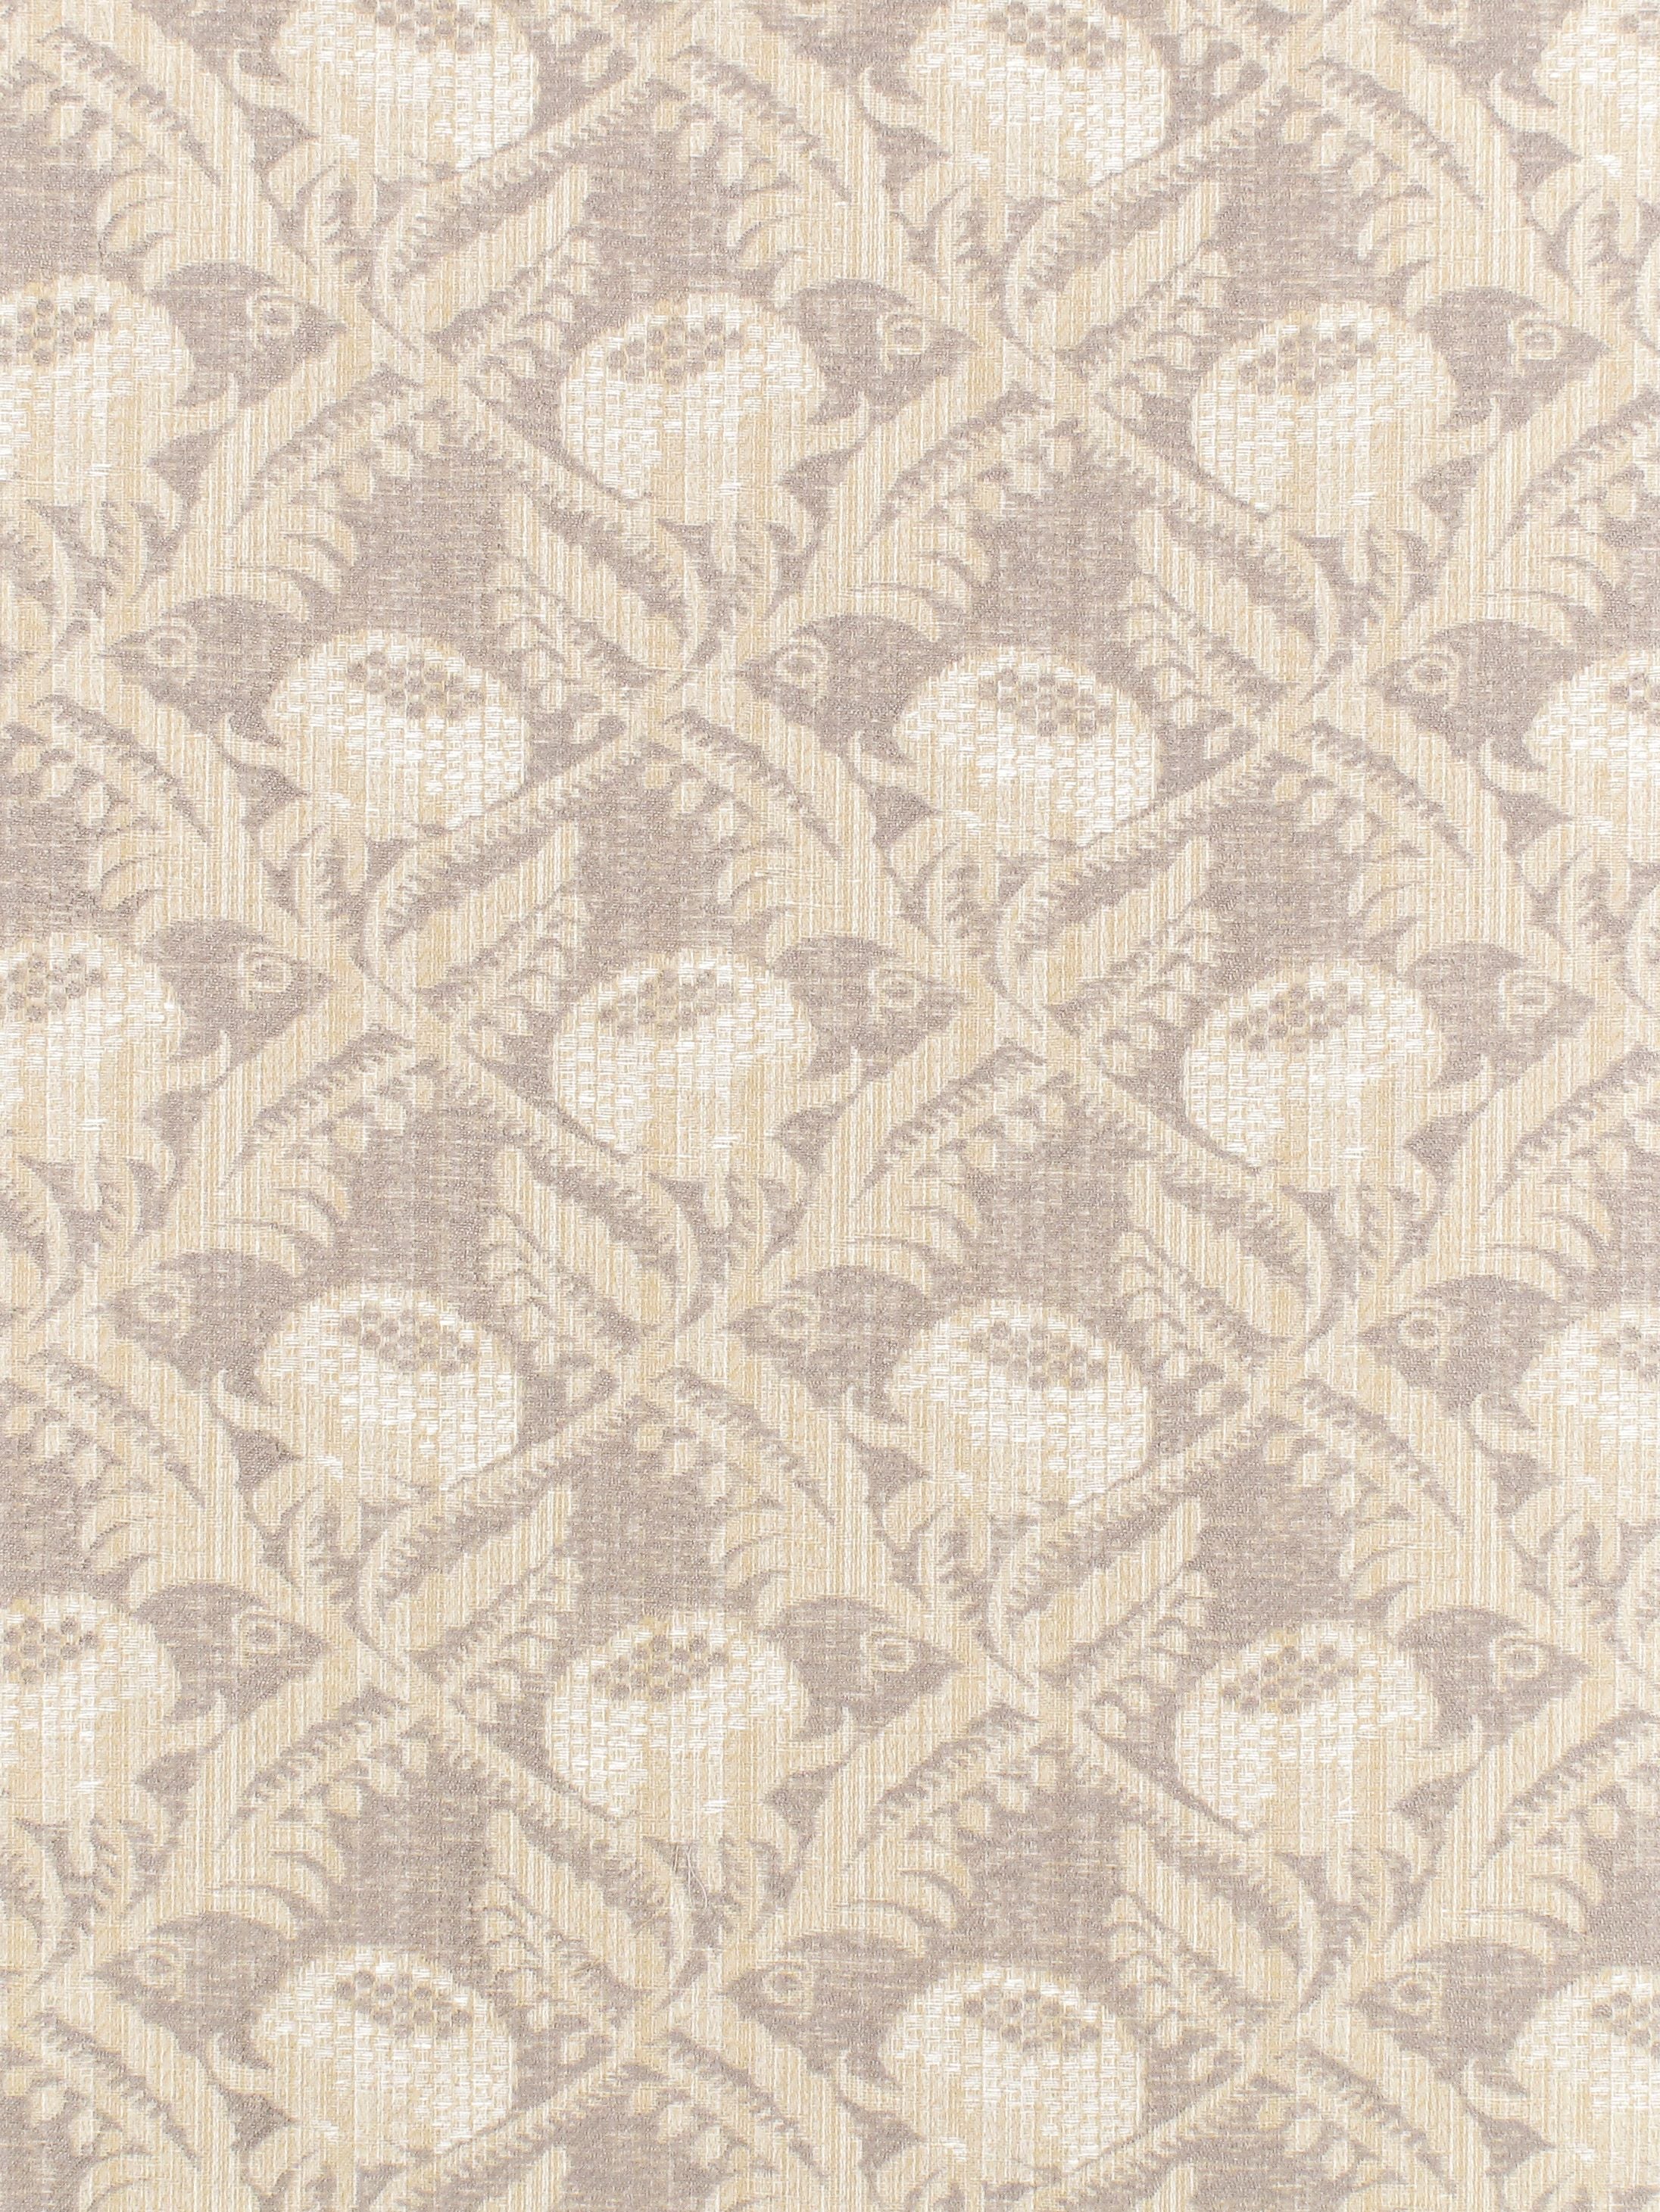 Boutonniere fabric in shadow color - pattern number A7 000414PG - by Scalamandre in the Old World Weavers collection